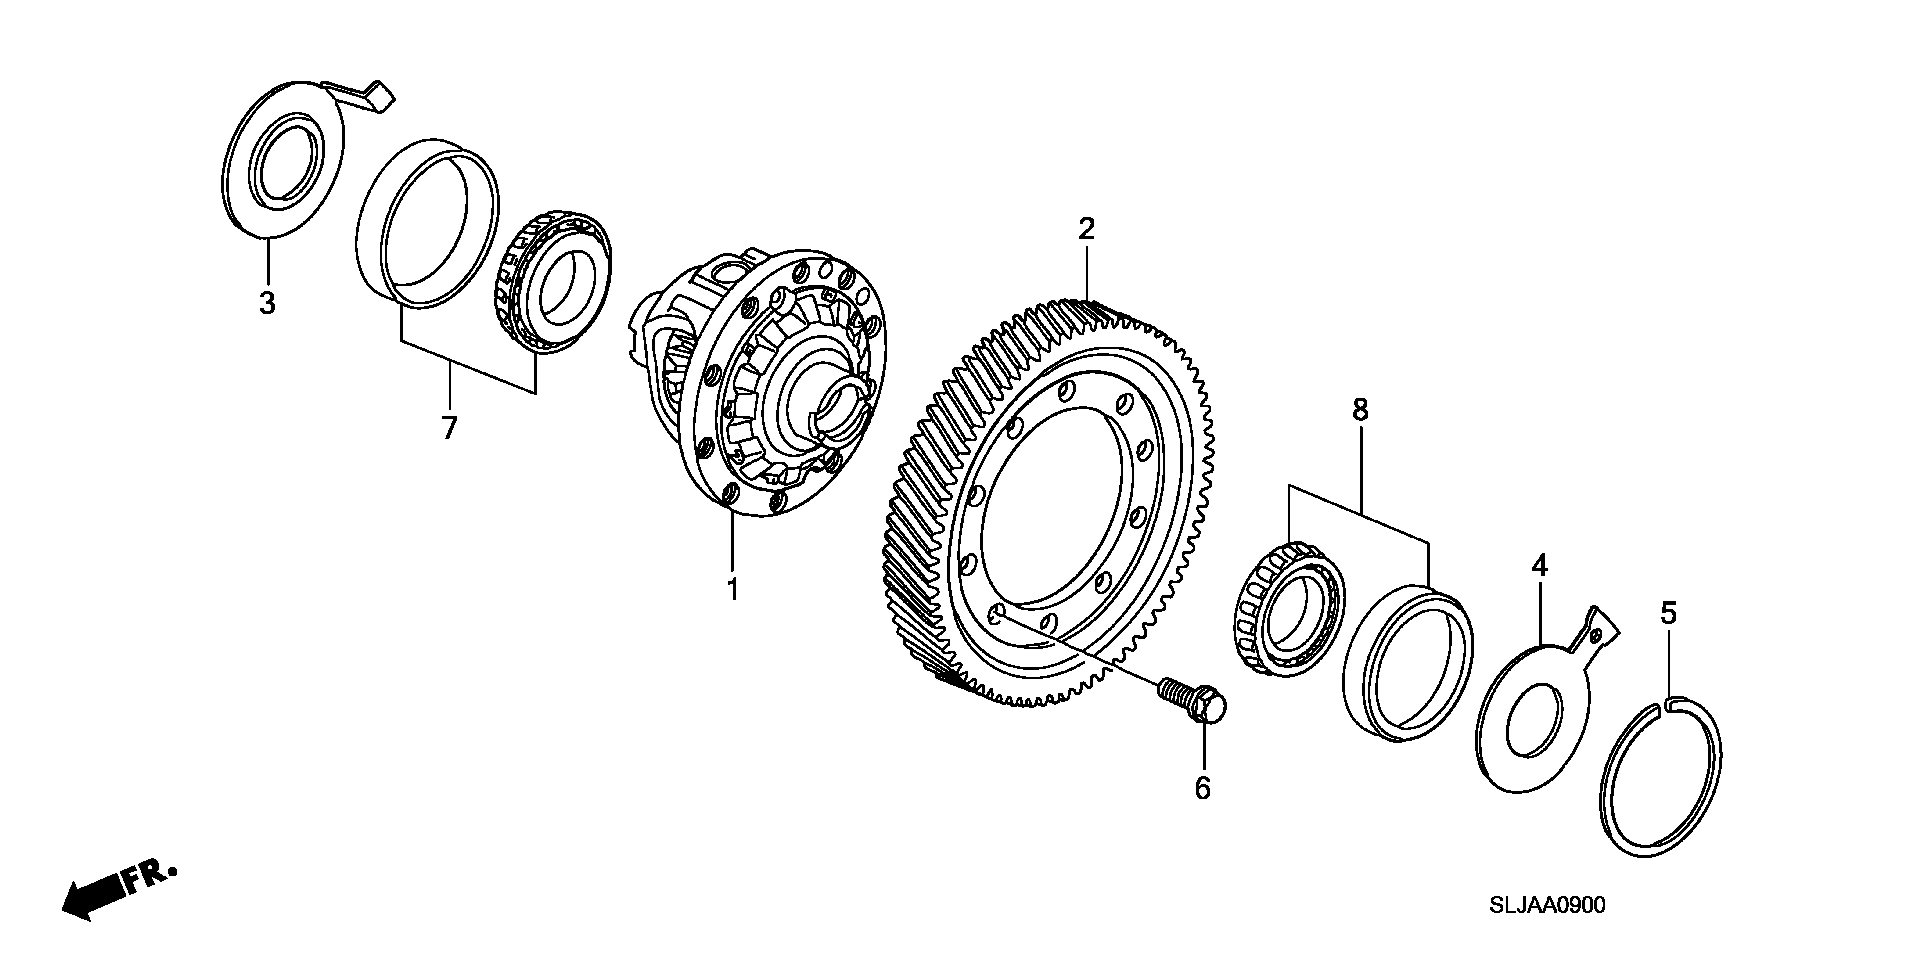 DIFFERENTIAL(2WD)